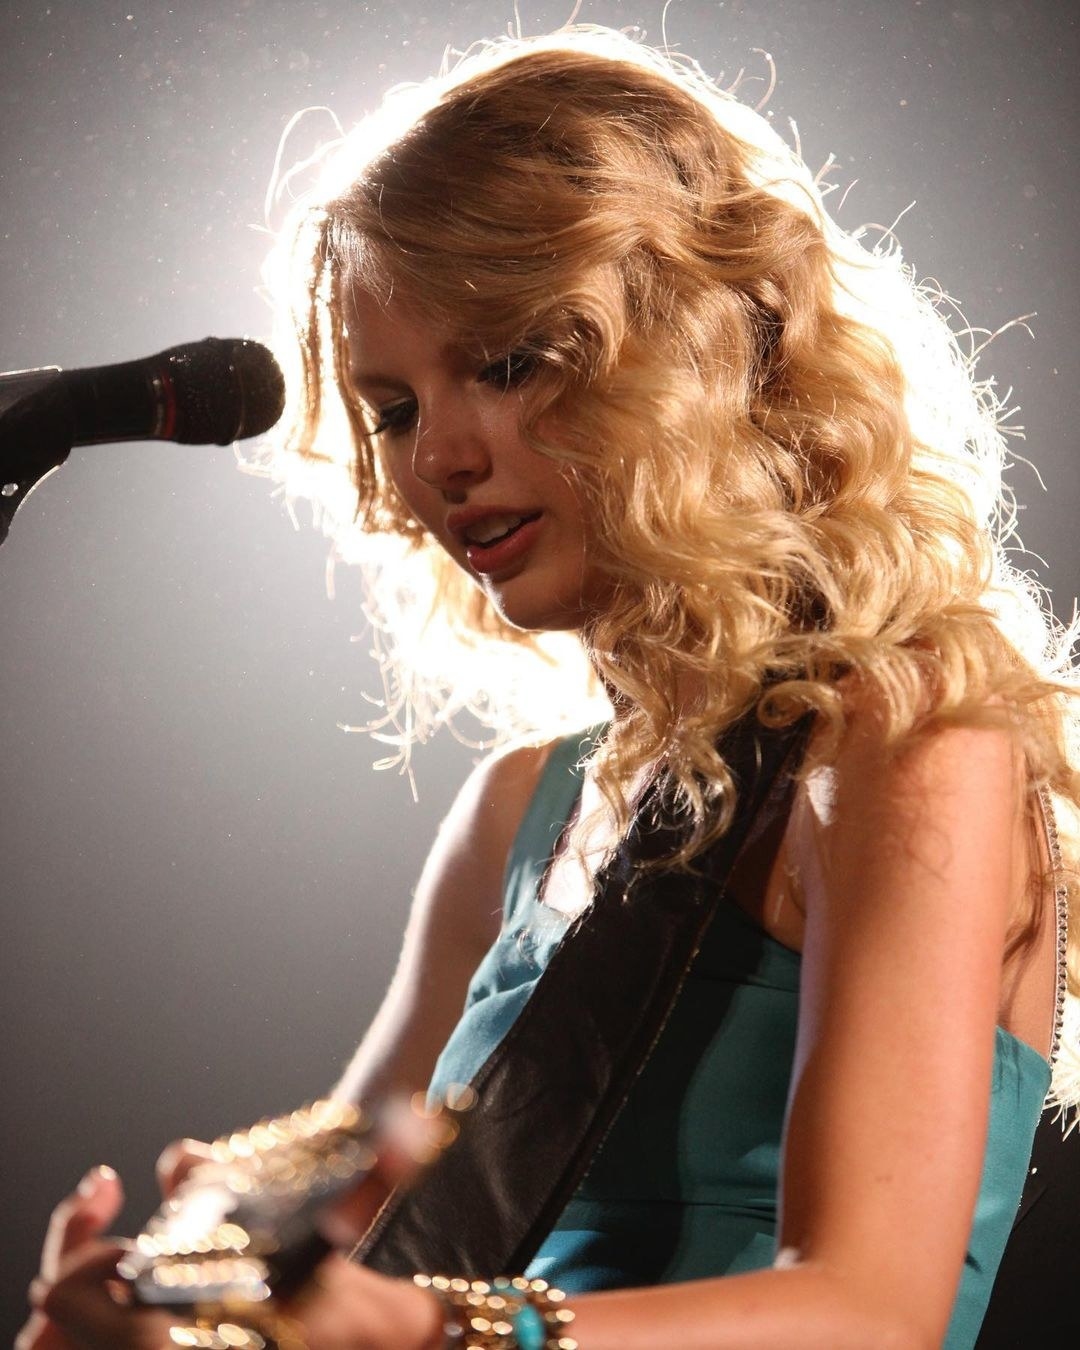 Taylor Swift playing guitar